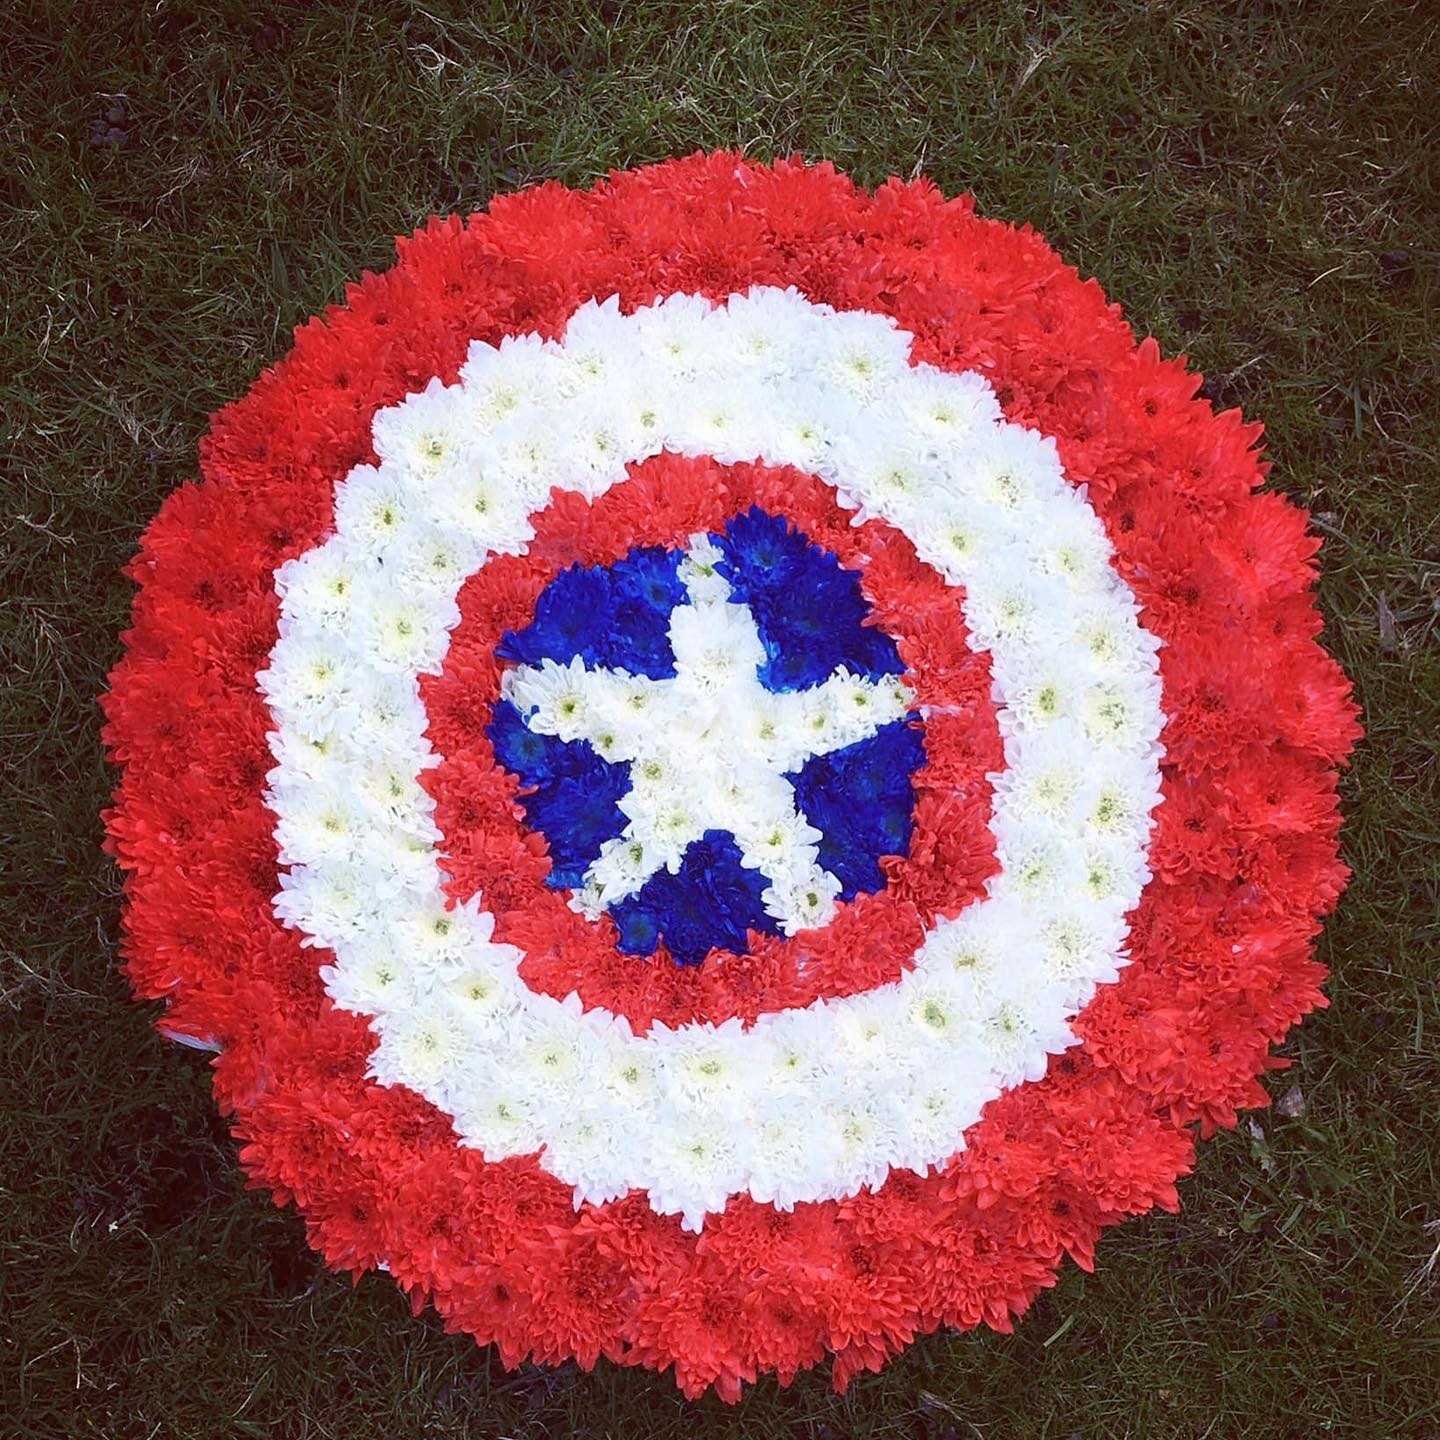 Bespoke Captain Americas Shield Funeral Tribute created by  Rachel's Country flowers who is a specialist funeral florist situated in the Scottish Highlands. Covering Edderton, Tain, Seaboard Villages, Balintore, Hilton, Fearn, Portmahomack, Invergordon, Alness, Dornoch, Golspie, Ardgay, Lairg. Lettering casket sprays, sheafs, posies and wreaths